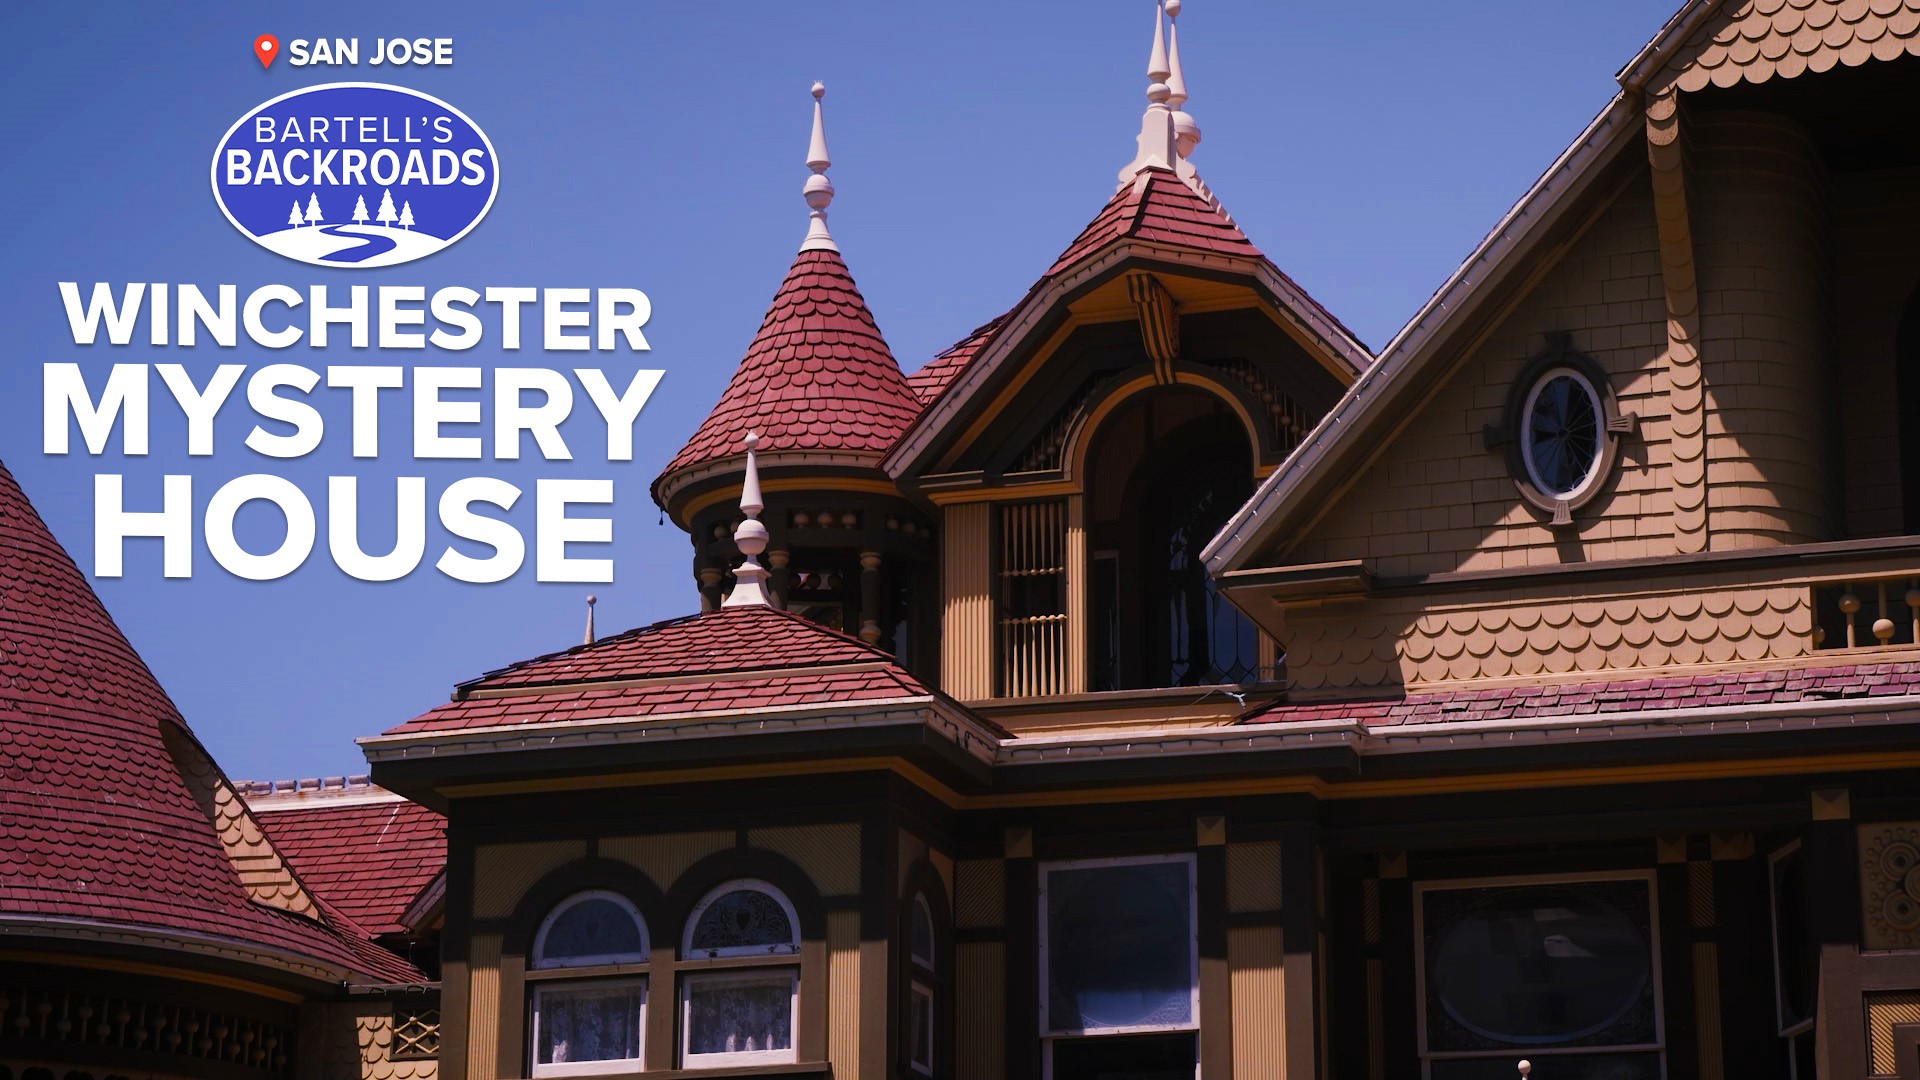 The Winchester Mystery House has been at the center of ghost stories and other legends for over 100 years.